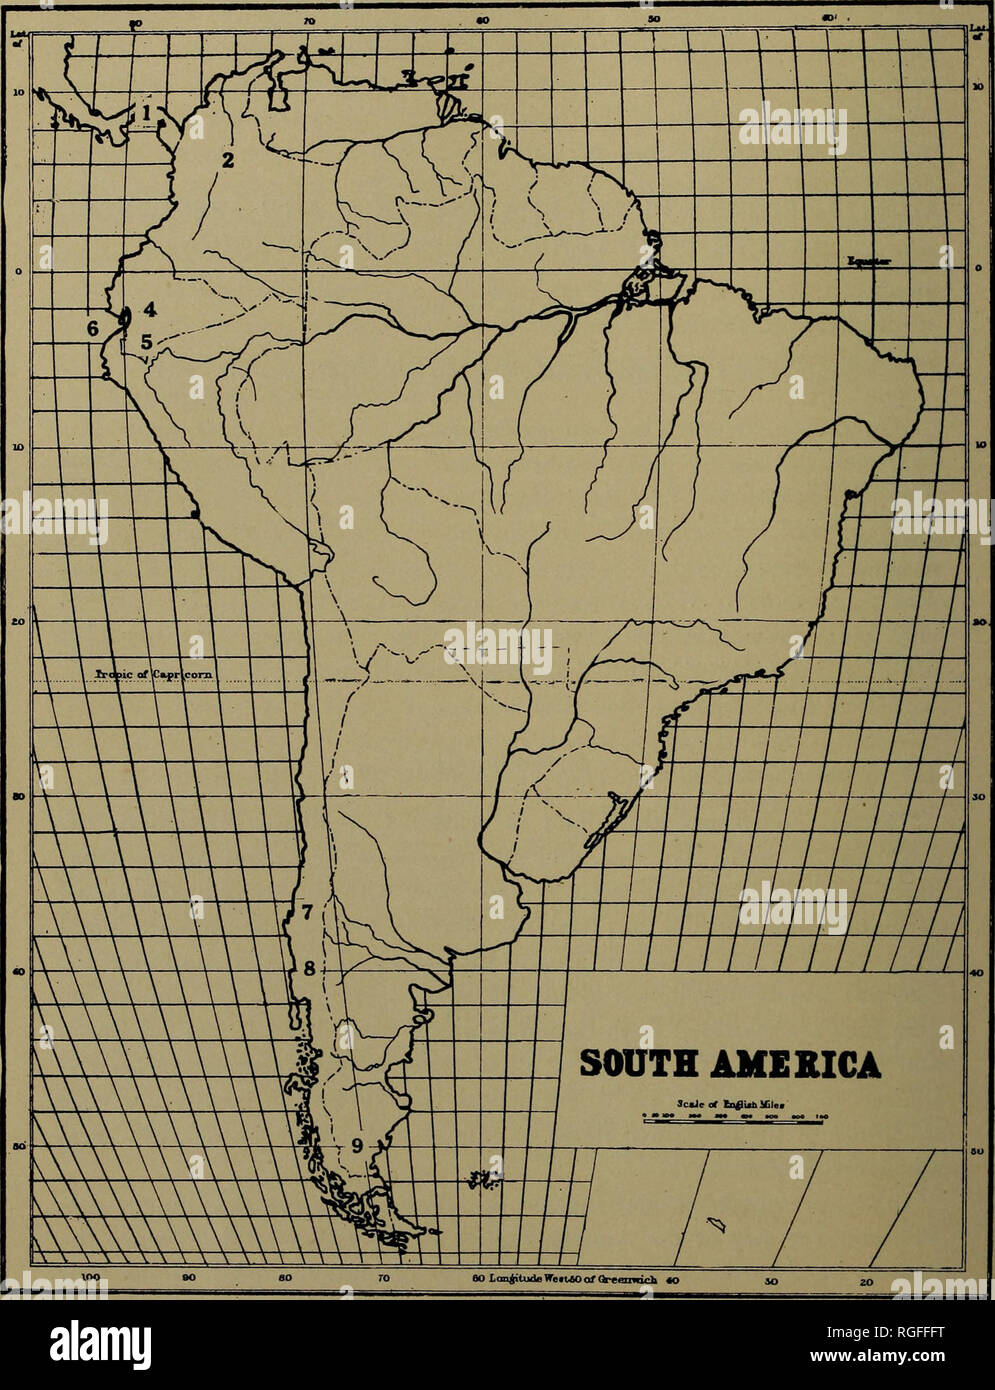 . Bulletin of the Geological Society of America. Geology. 638 E. W. BERRY CERTAIN PLANT-BEARING BEDS IN SOUTH AMERICA. JOHNSTON Semes or DesK Haps COPrmOHT 1»1'». A. J. NTSTROMtiCO.. CMIOAOO. Figure l.—Map of South America Showing distribution of lower Miocene plant beds : 1, Canal Zone ; 2, Santa Ana, Rio Magdalena Valley, Colombia ; 3, near Buga, Rio Cauca Valley; Colombia ; 4, Tablayacu, Rio Jubones basin, Ecuador ; 5, Loja basin, Ecuador ; 6, near Tumbez, Peru ; 7, Coronel, Chile ; 8, Navidad beds, Chile ; 9, Patagonian beds, Argentina.. Please note that these images are extracted from sca Stock Photo